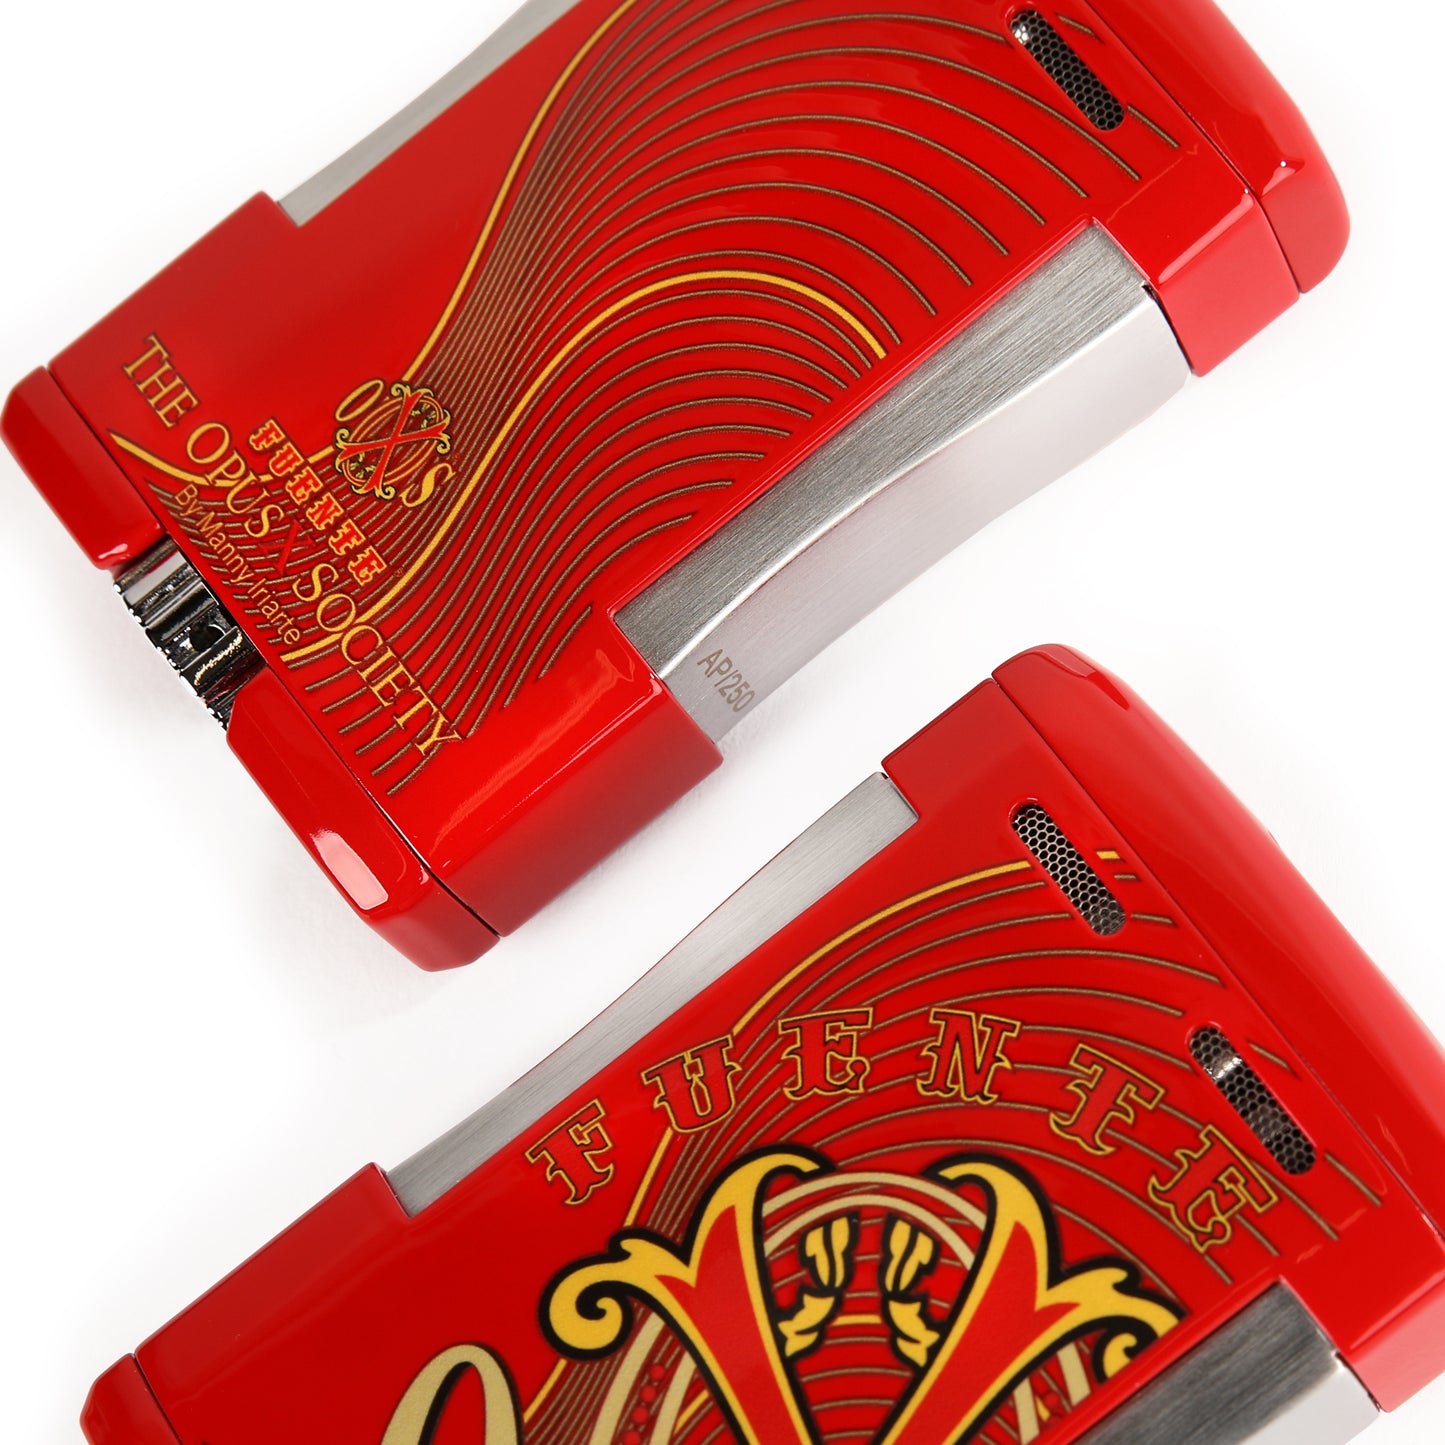 Fuente The OpusX Society OXS Table Top Lighter - La Roja (red)